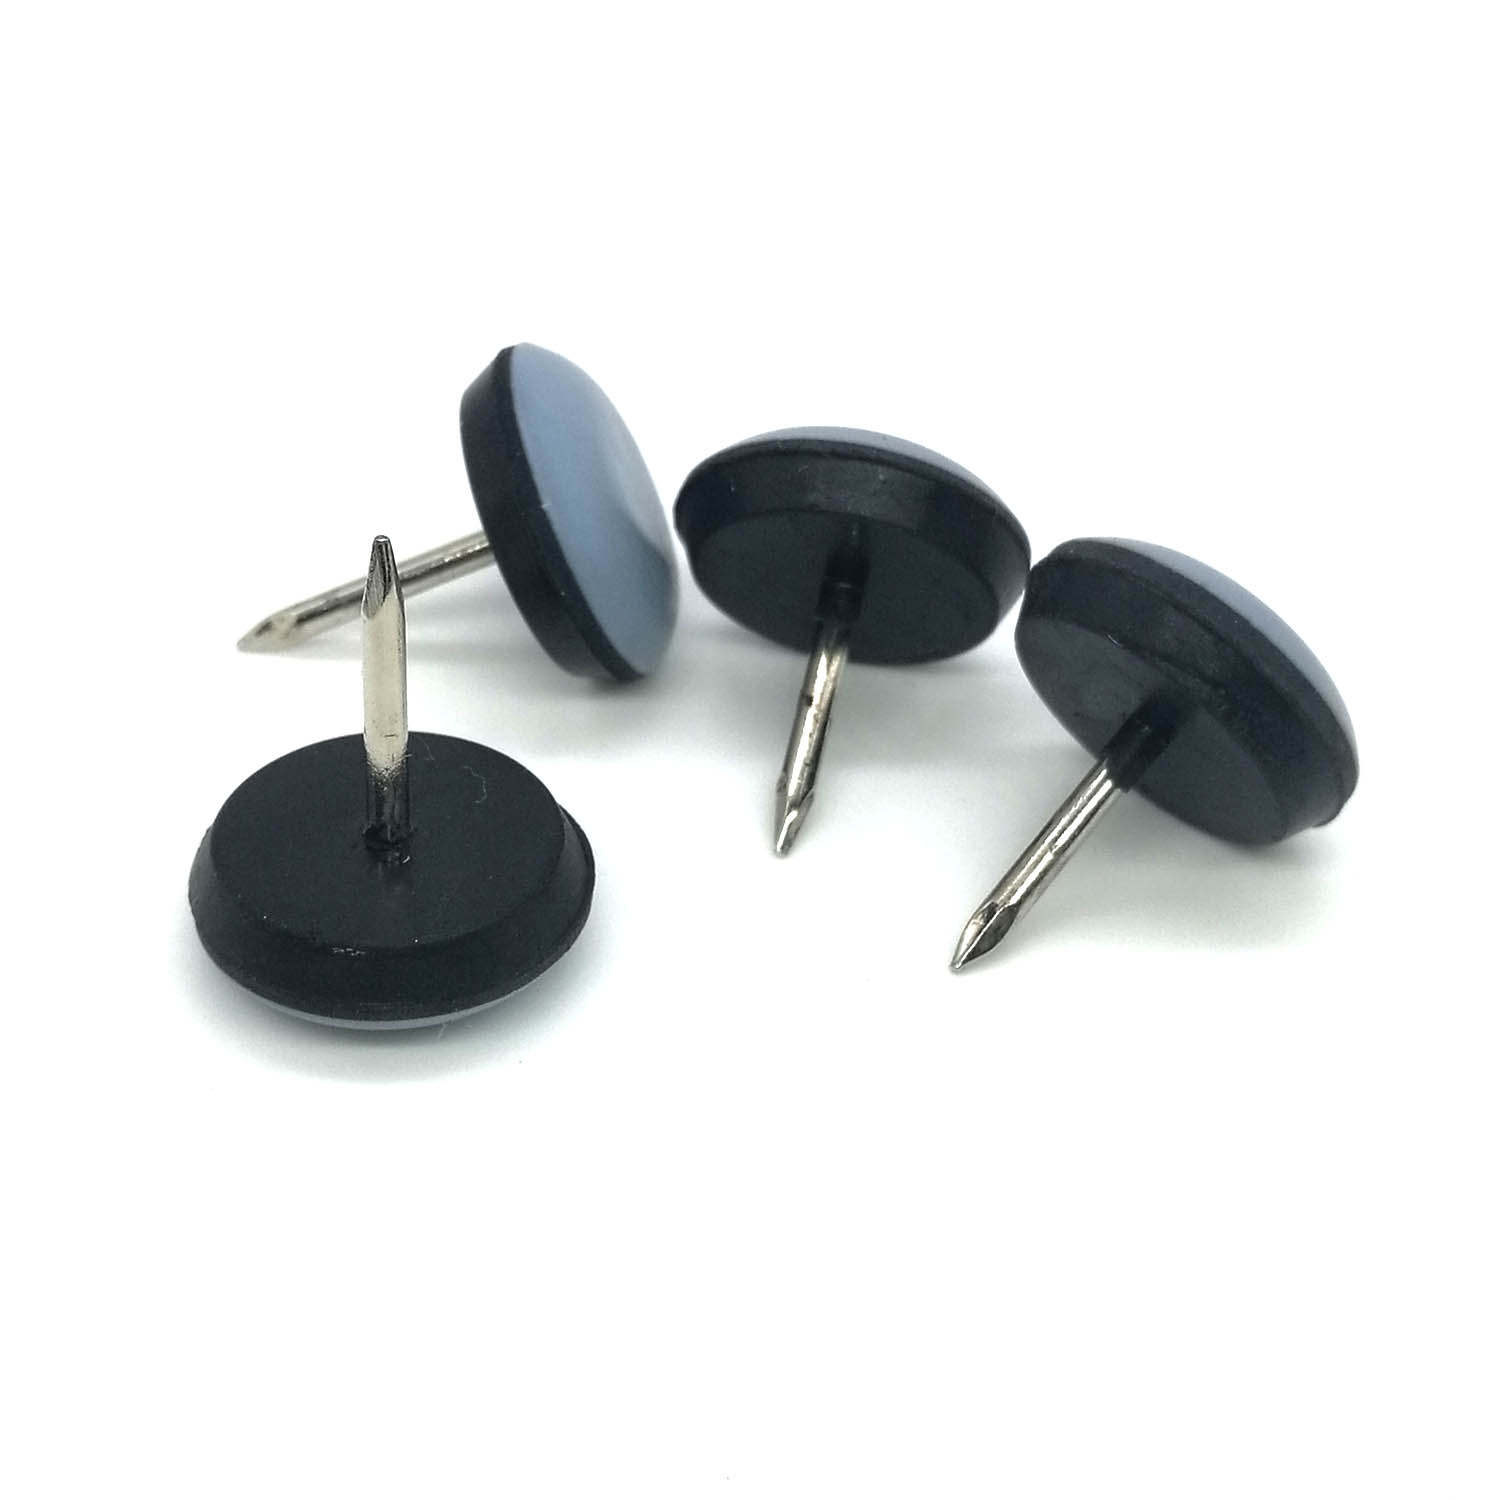 PTFE Easy Teflon Sliders Chair Glides Nail on easy Glides